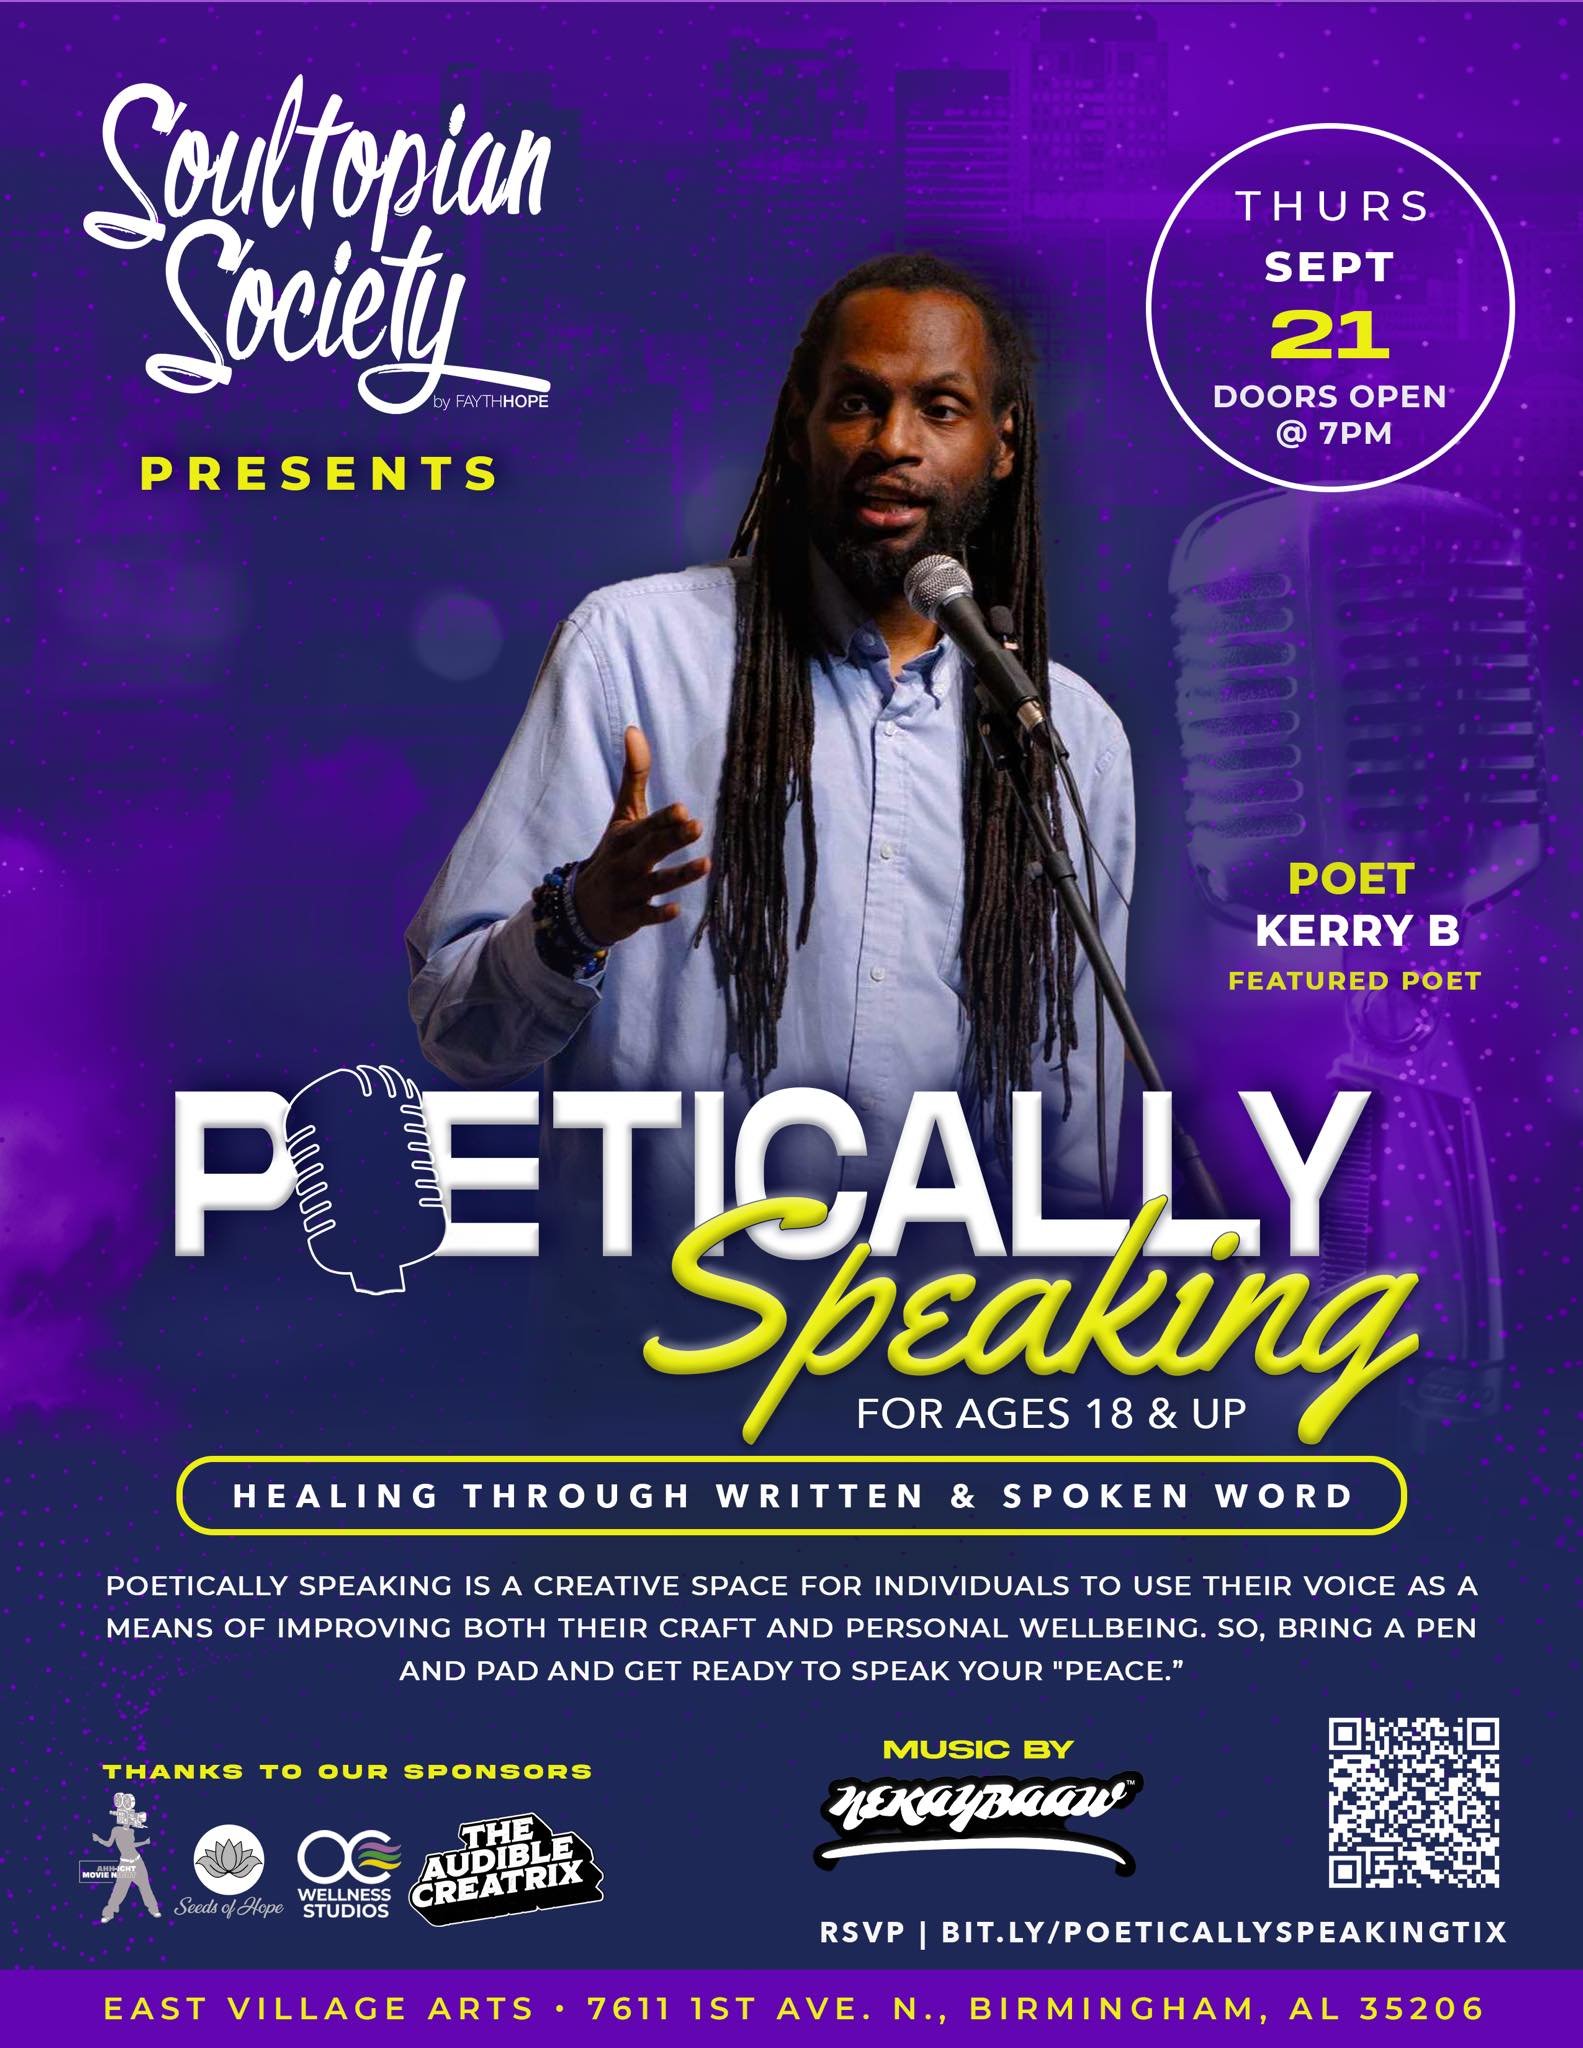 Thursday is almost here! Join us for #PoeticallySpeaking at East Village Arts of Birmingham&hellip;THIS THURSDAY (9/21)! Doors open at 7pm and at 7:30pm, we will begin. Don&rsquo;t miss it!
Brought to you by Soultopian Society, Ahh-ight Movie Night, 